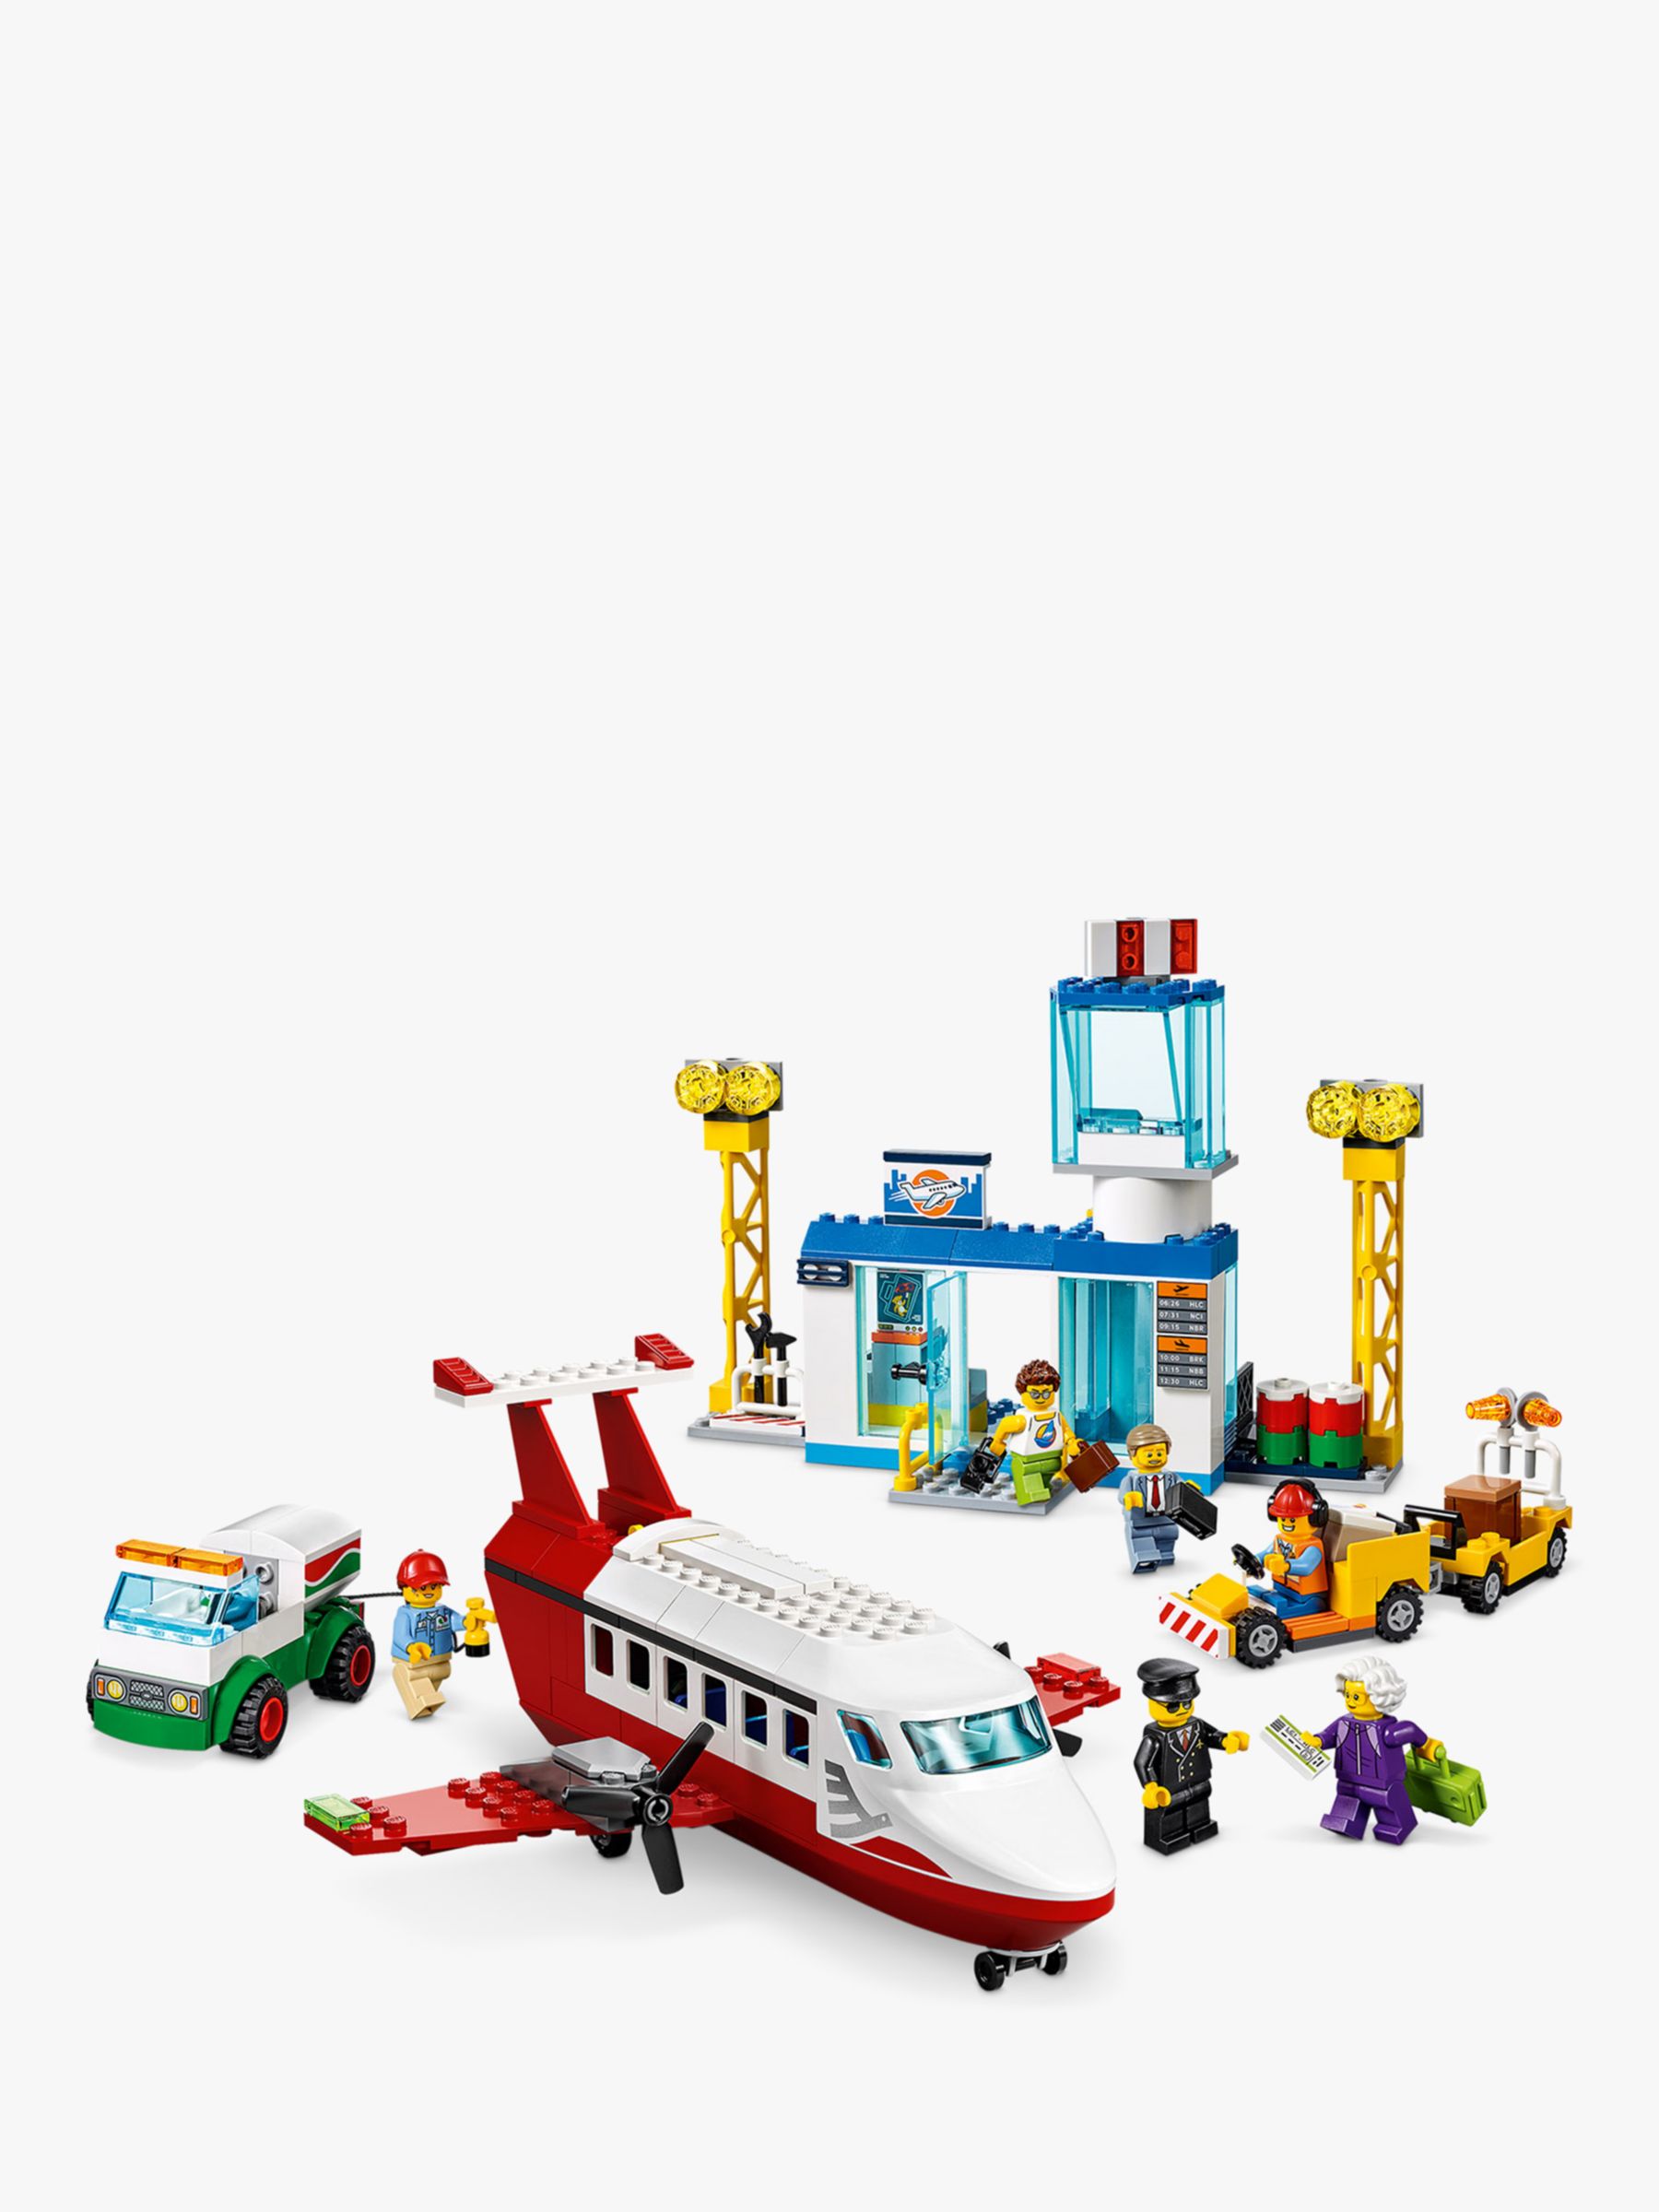 LEGO City 60261 Central Airport at John Lewis & Partners